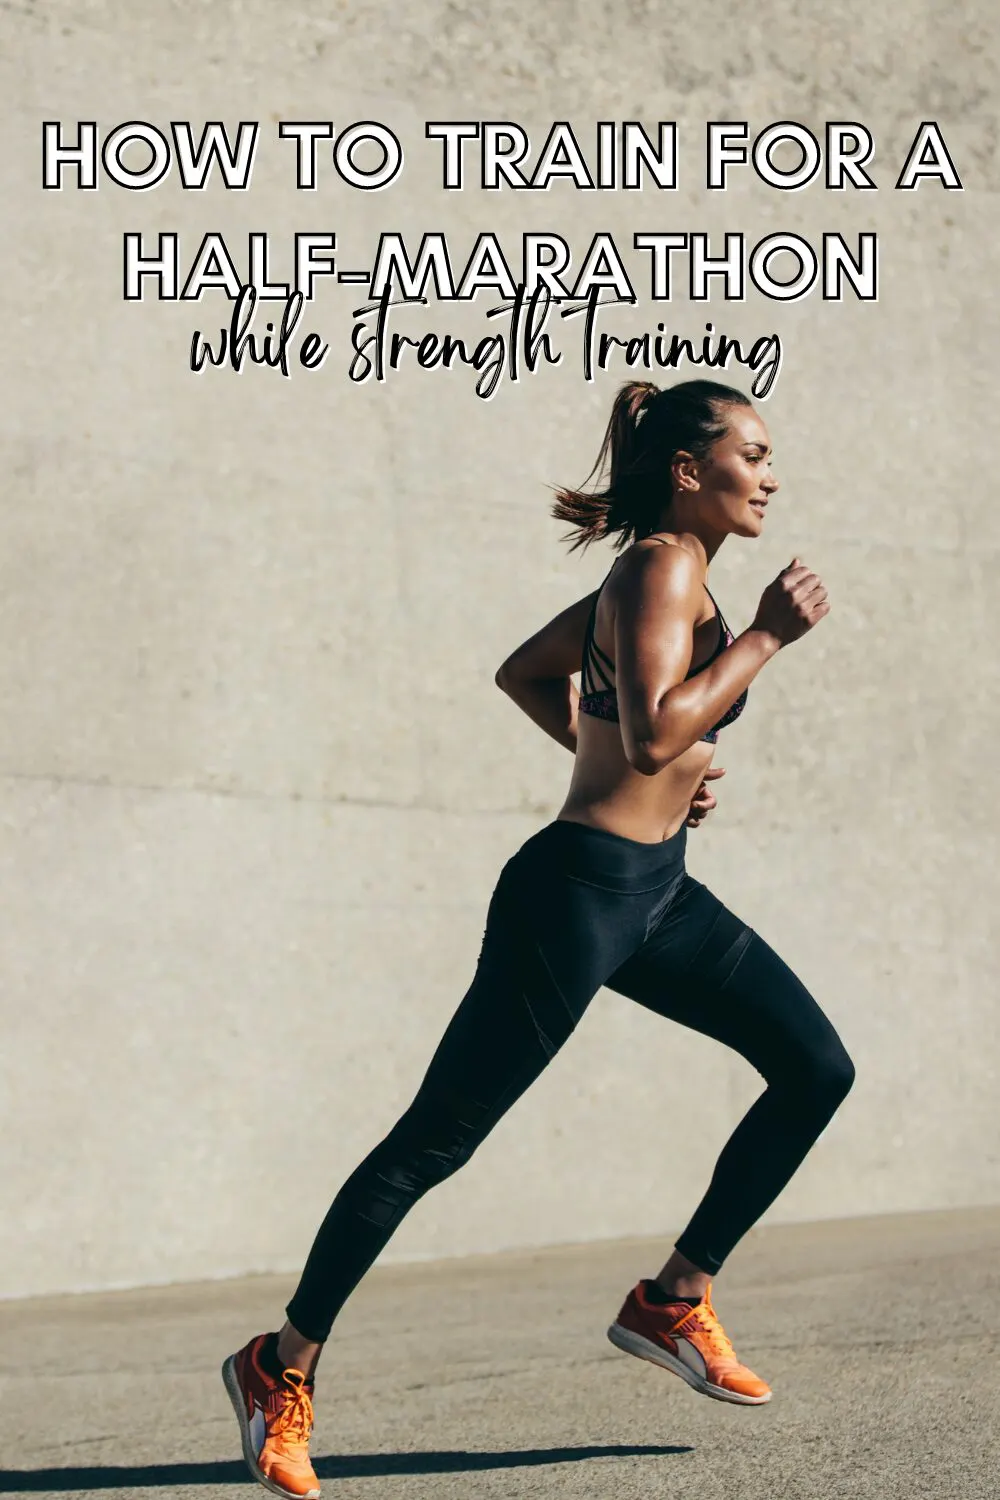 How to train for a half marathon while strength training - The Fitnessista